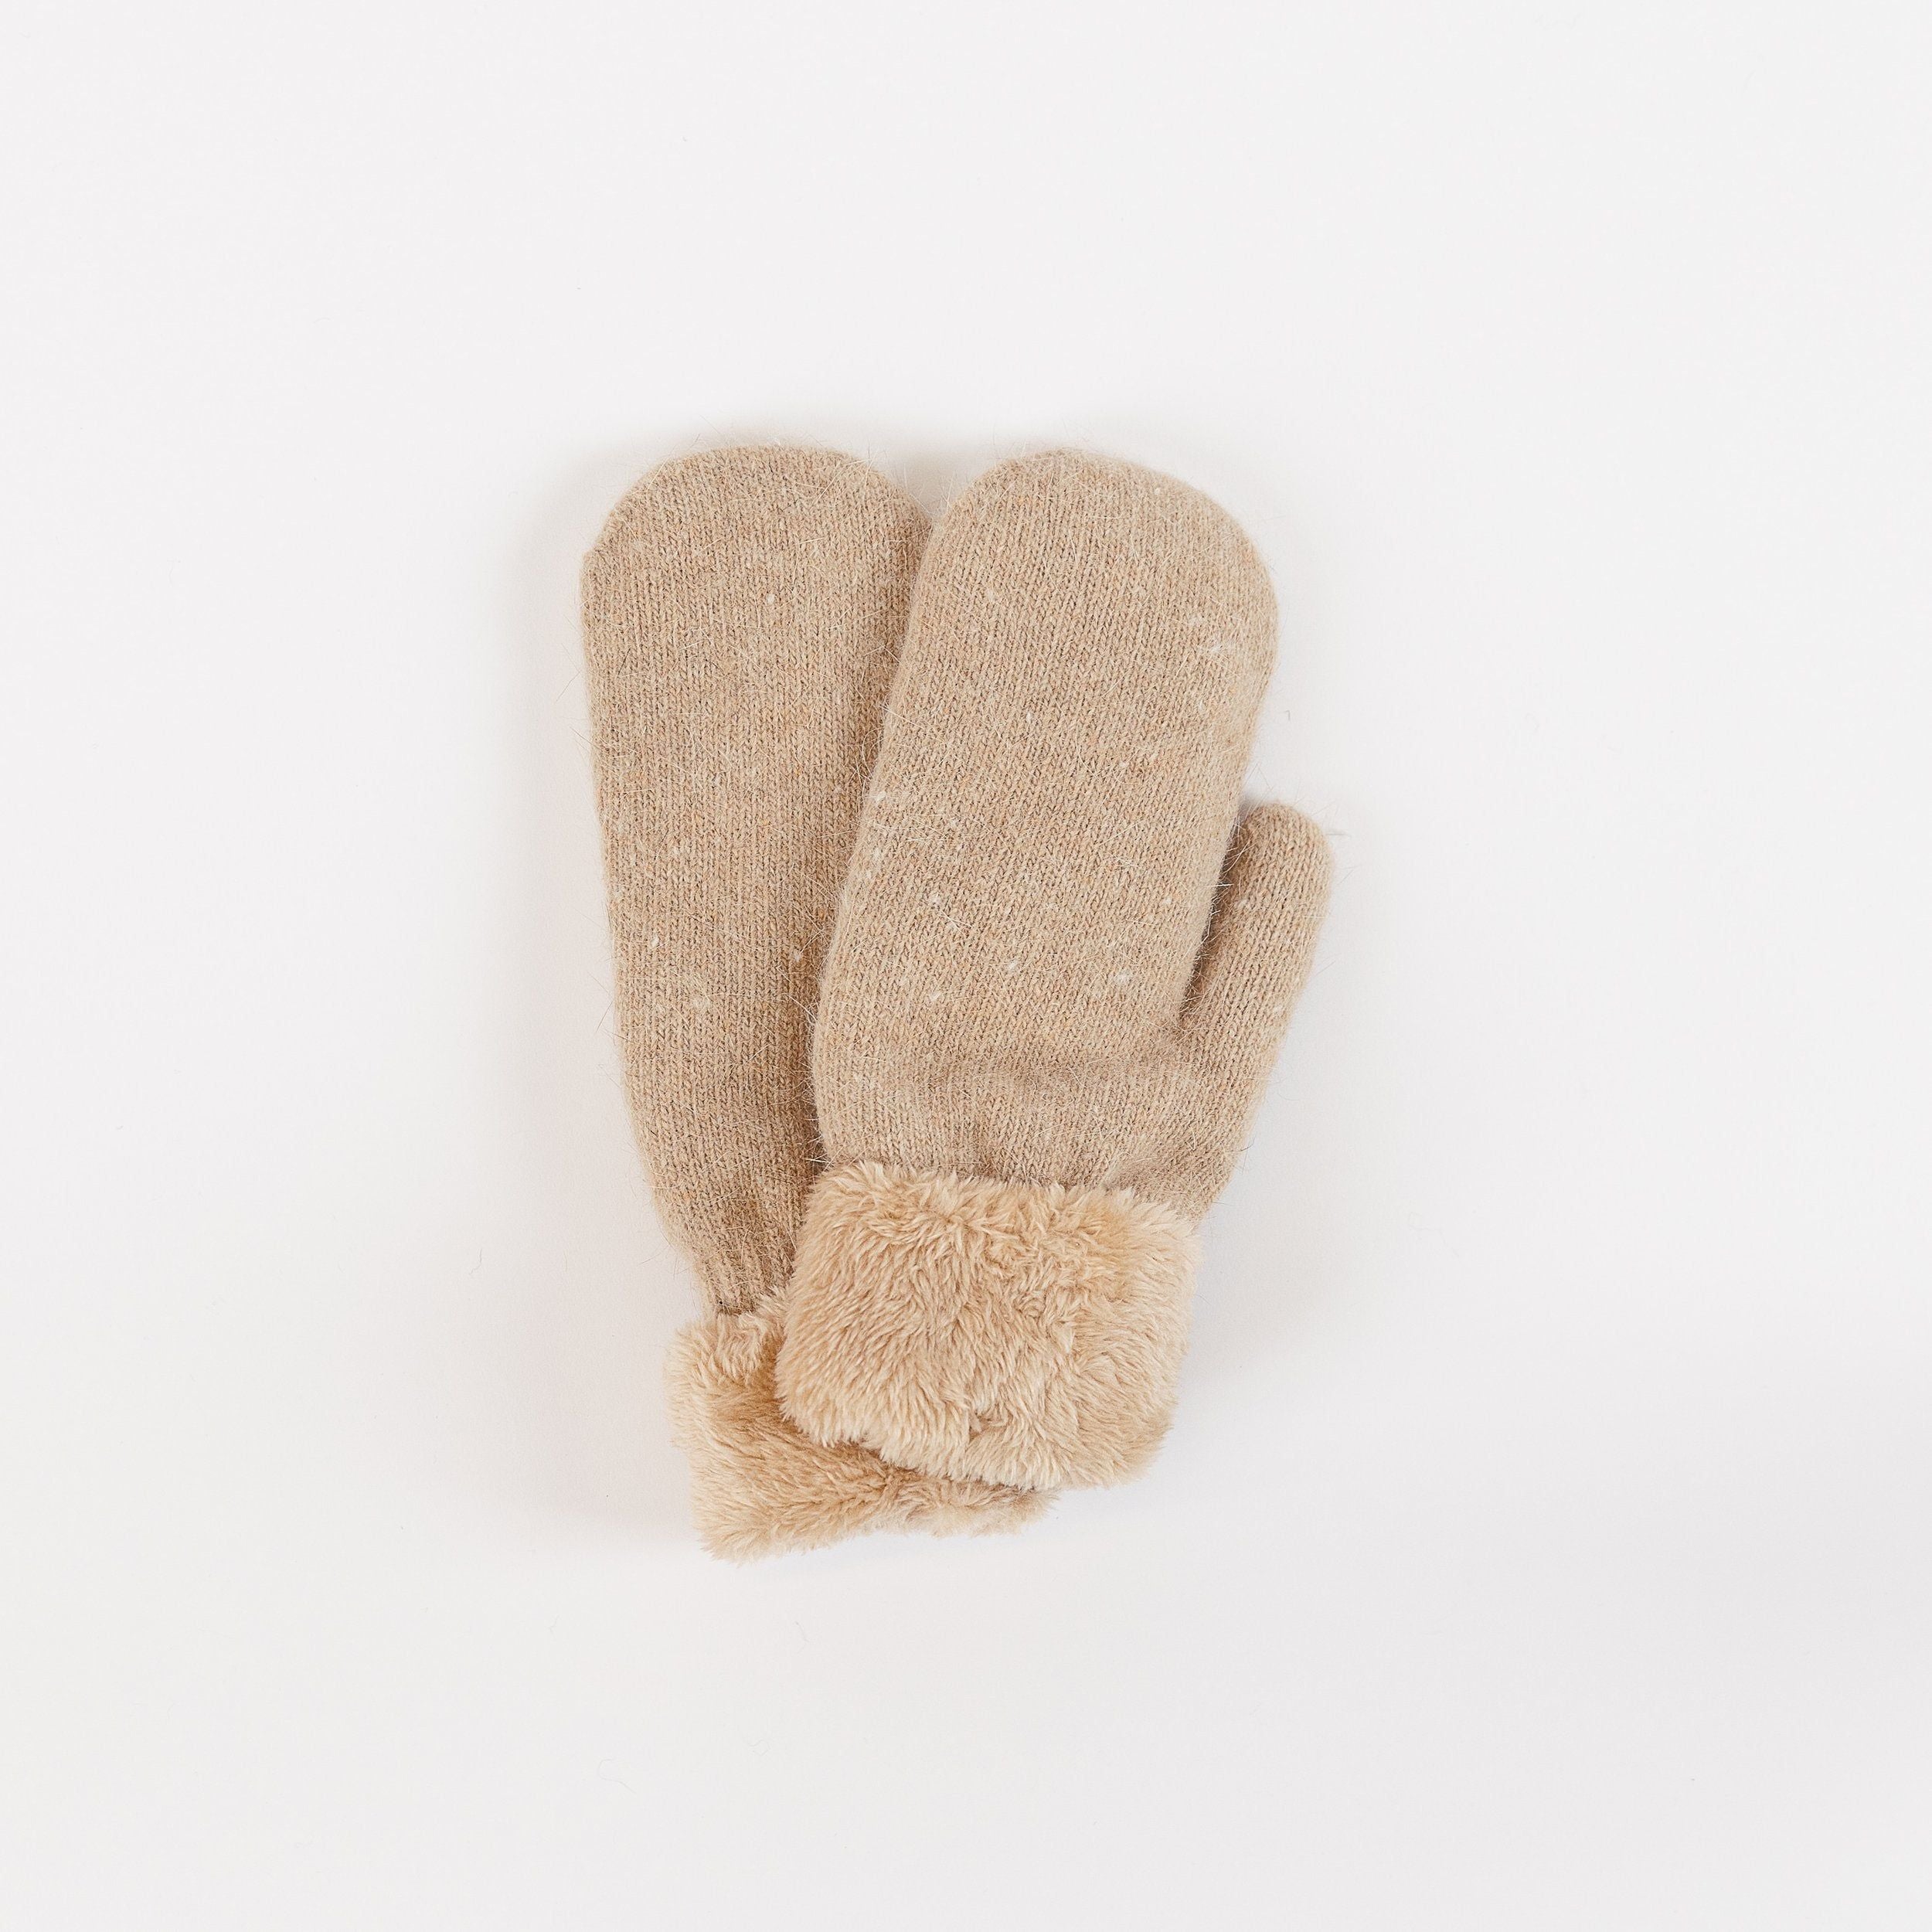 Lyla & Luxe - Knit Mittens in Taupe